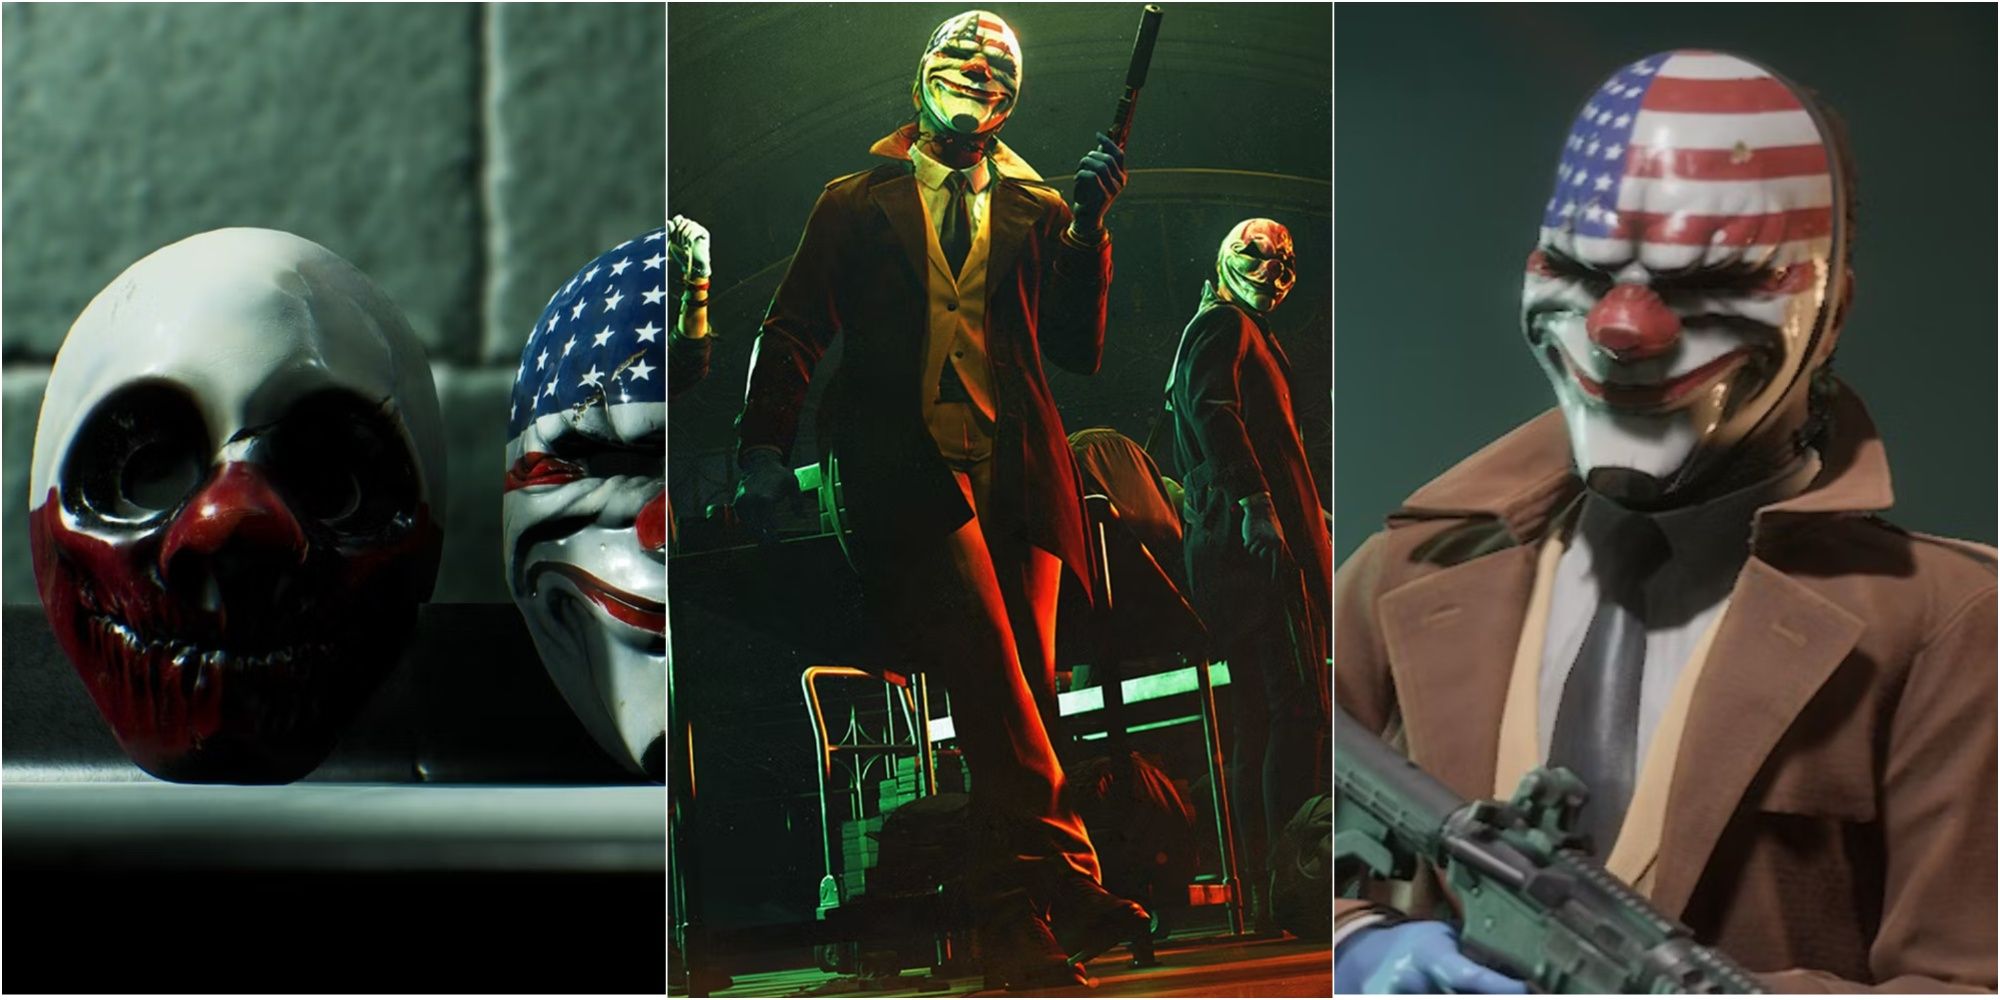 Payday 3 cinematic screenshots of different masks available in game; left is masks sitting on shelf, middle is characters wearing masks in game world, right is one character wearing a mask close up